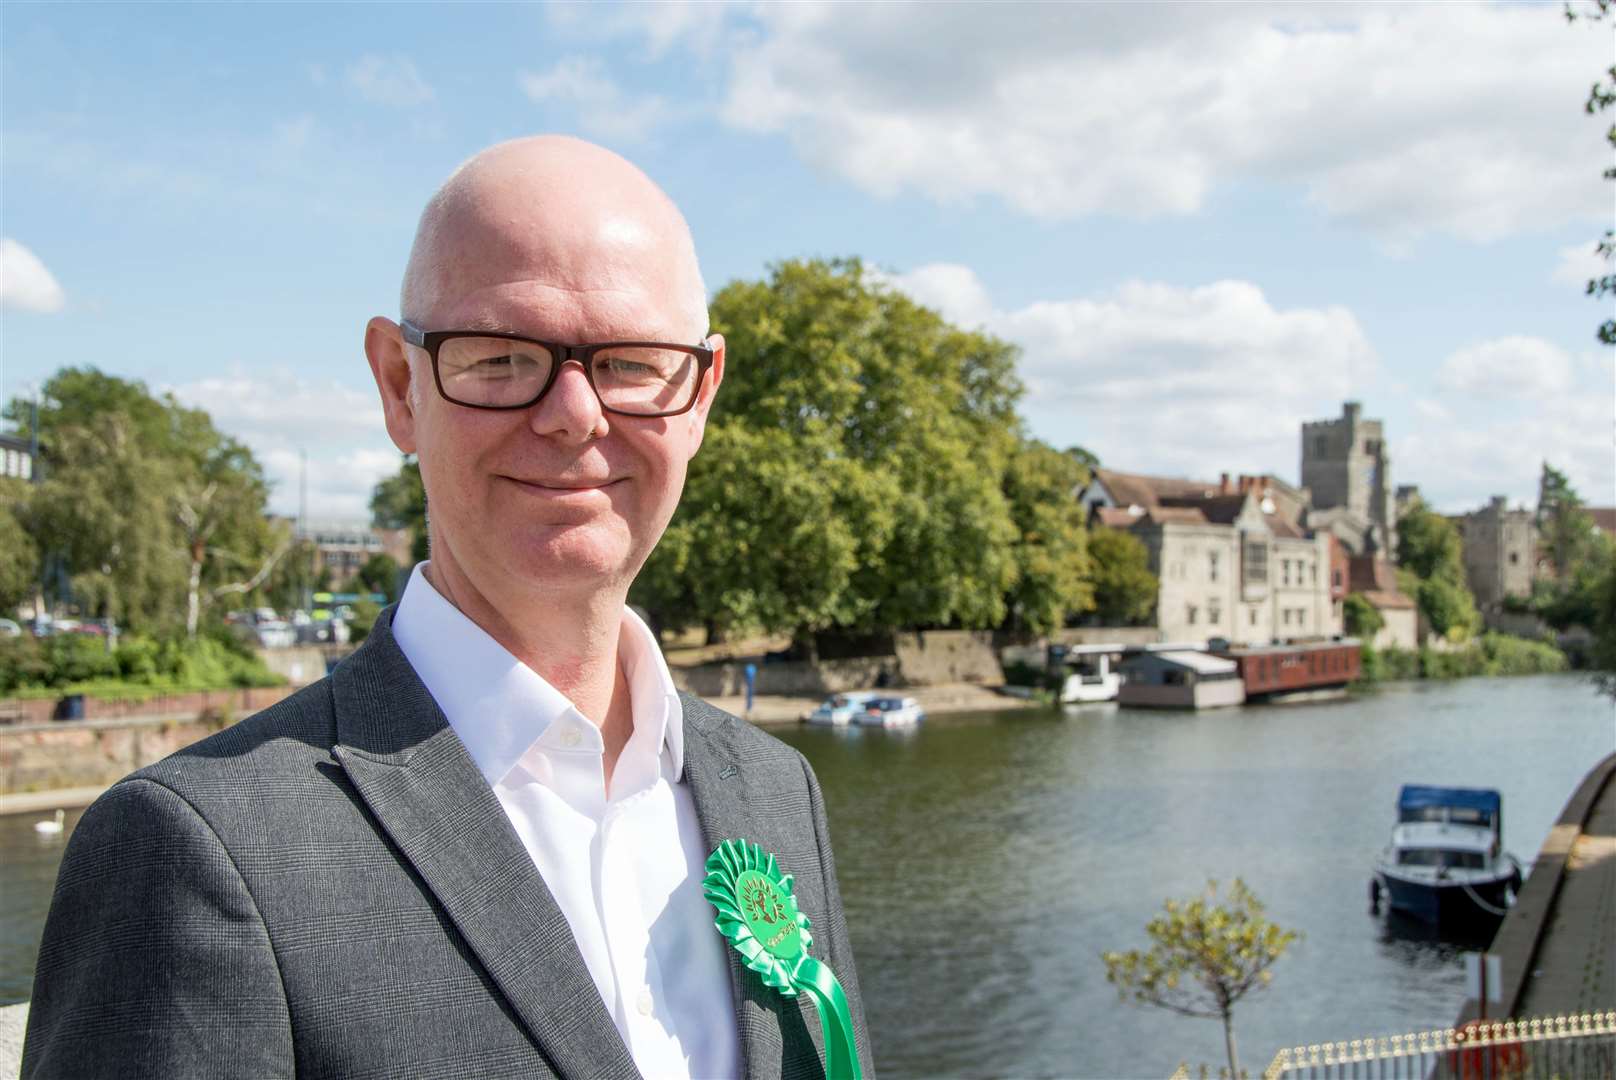 Green Party leader Stuart Jeffery will be a candidate at the next General Election